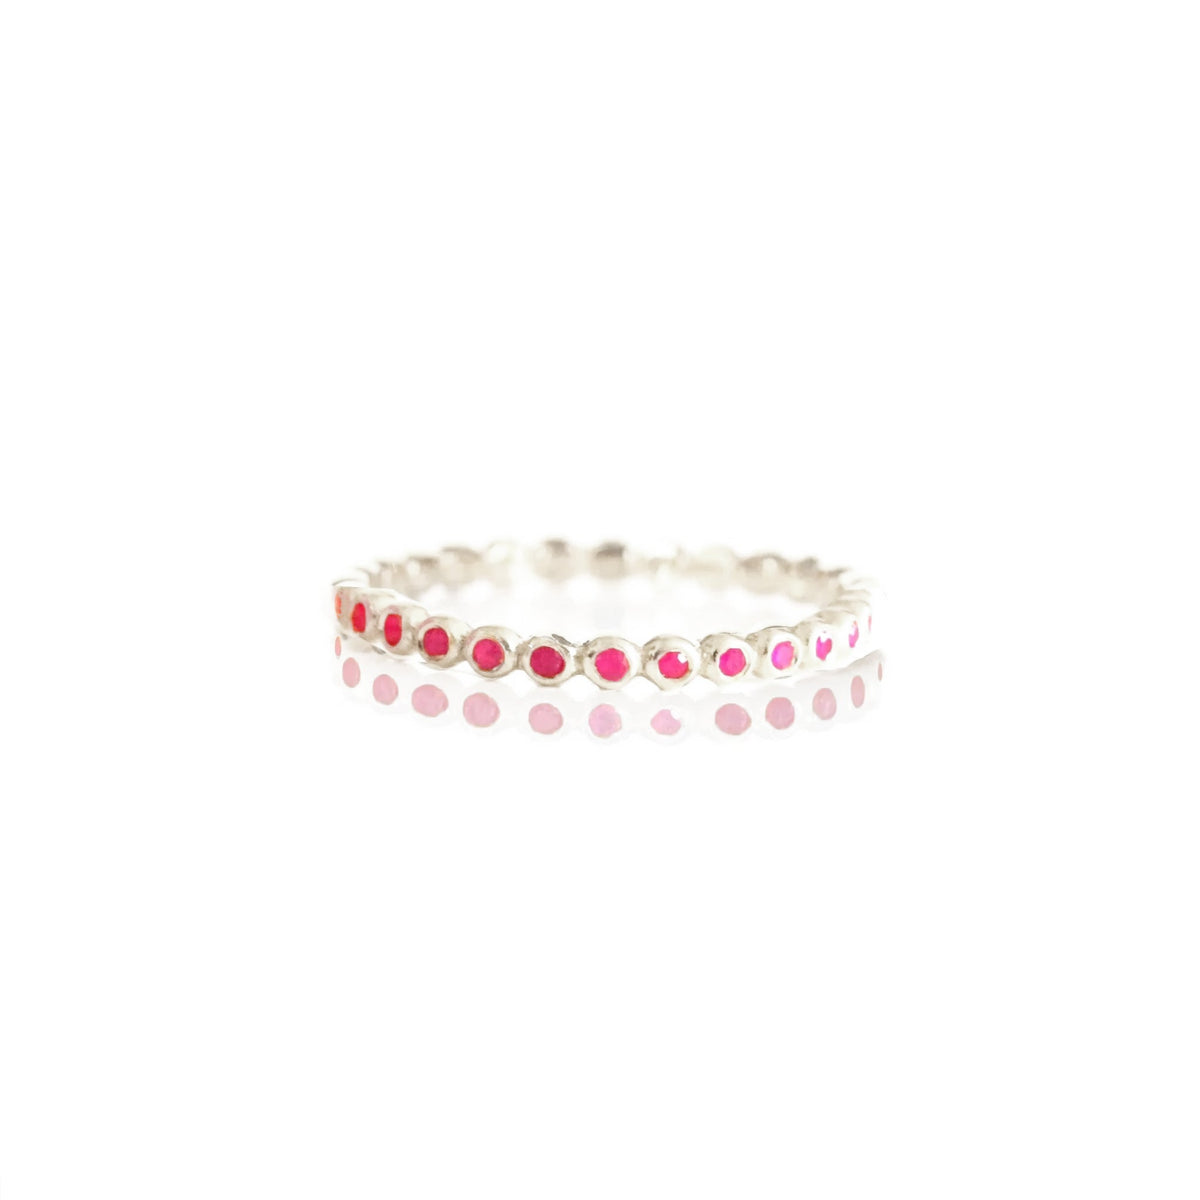 PRE-ORDER LOVE THIN DISK BAND RING - HOT PINK CHALCEDONY - SO PRETTY CARA COTTER